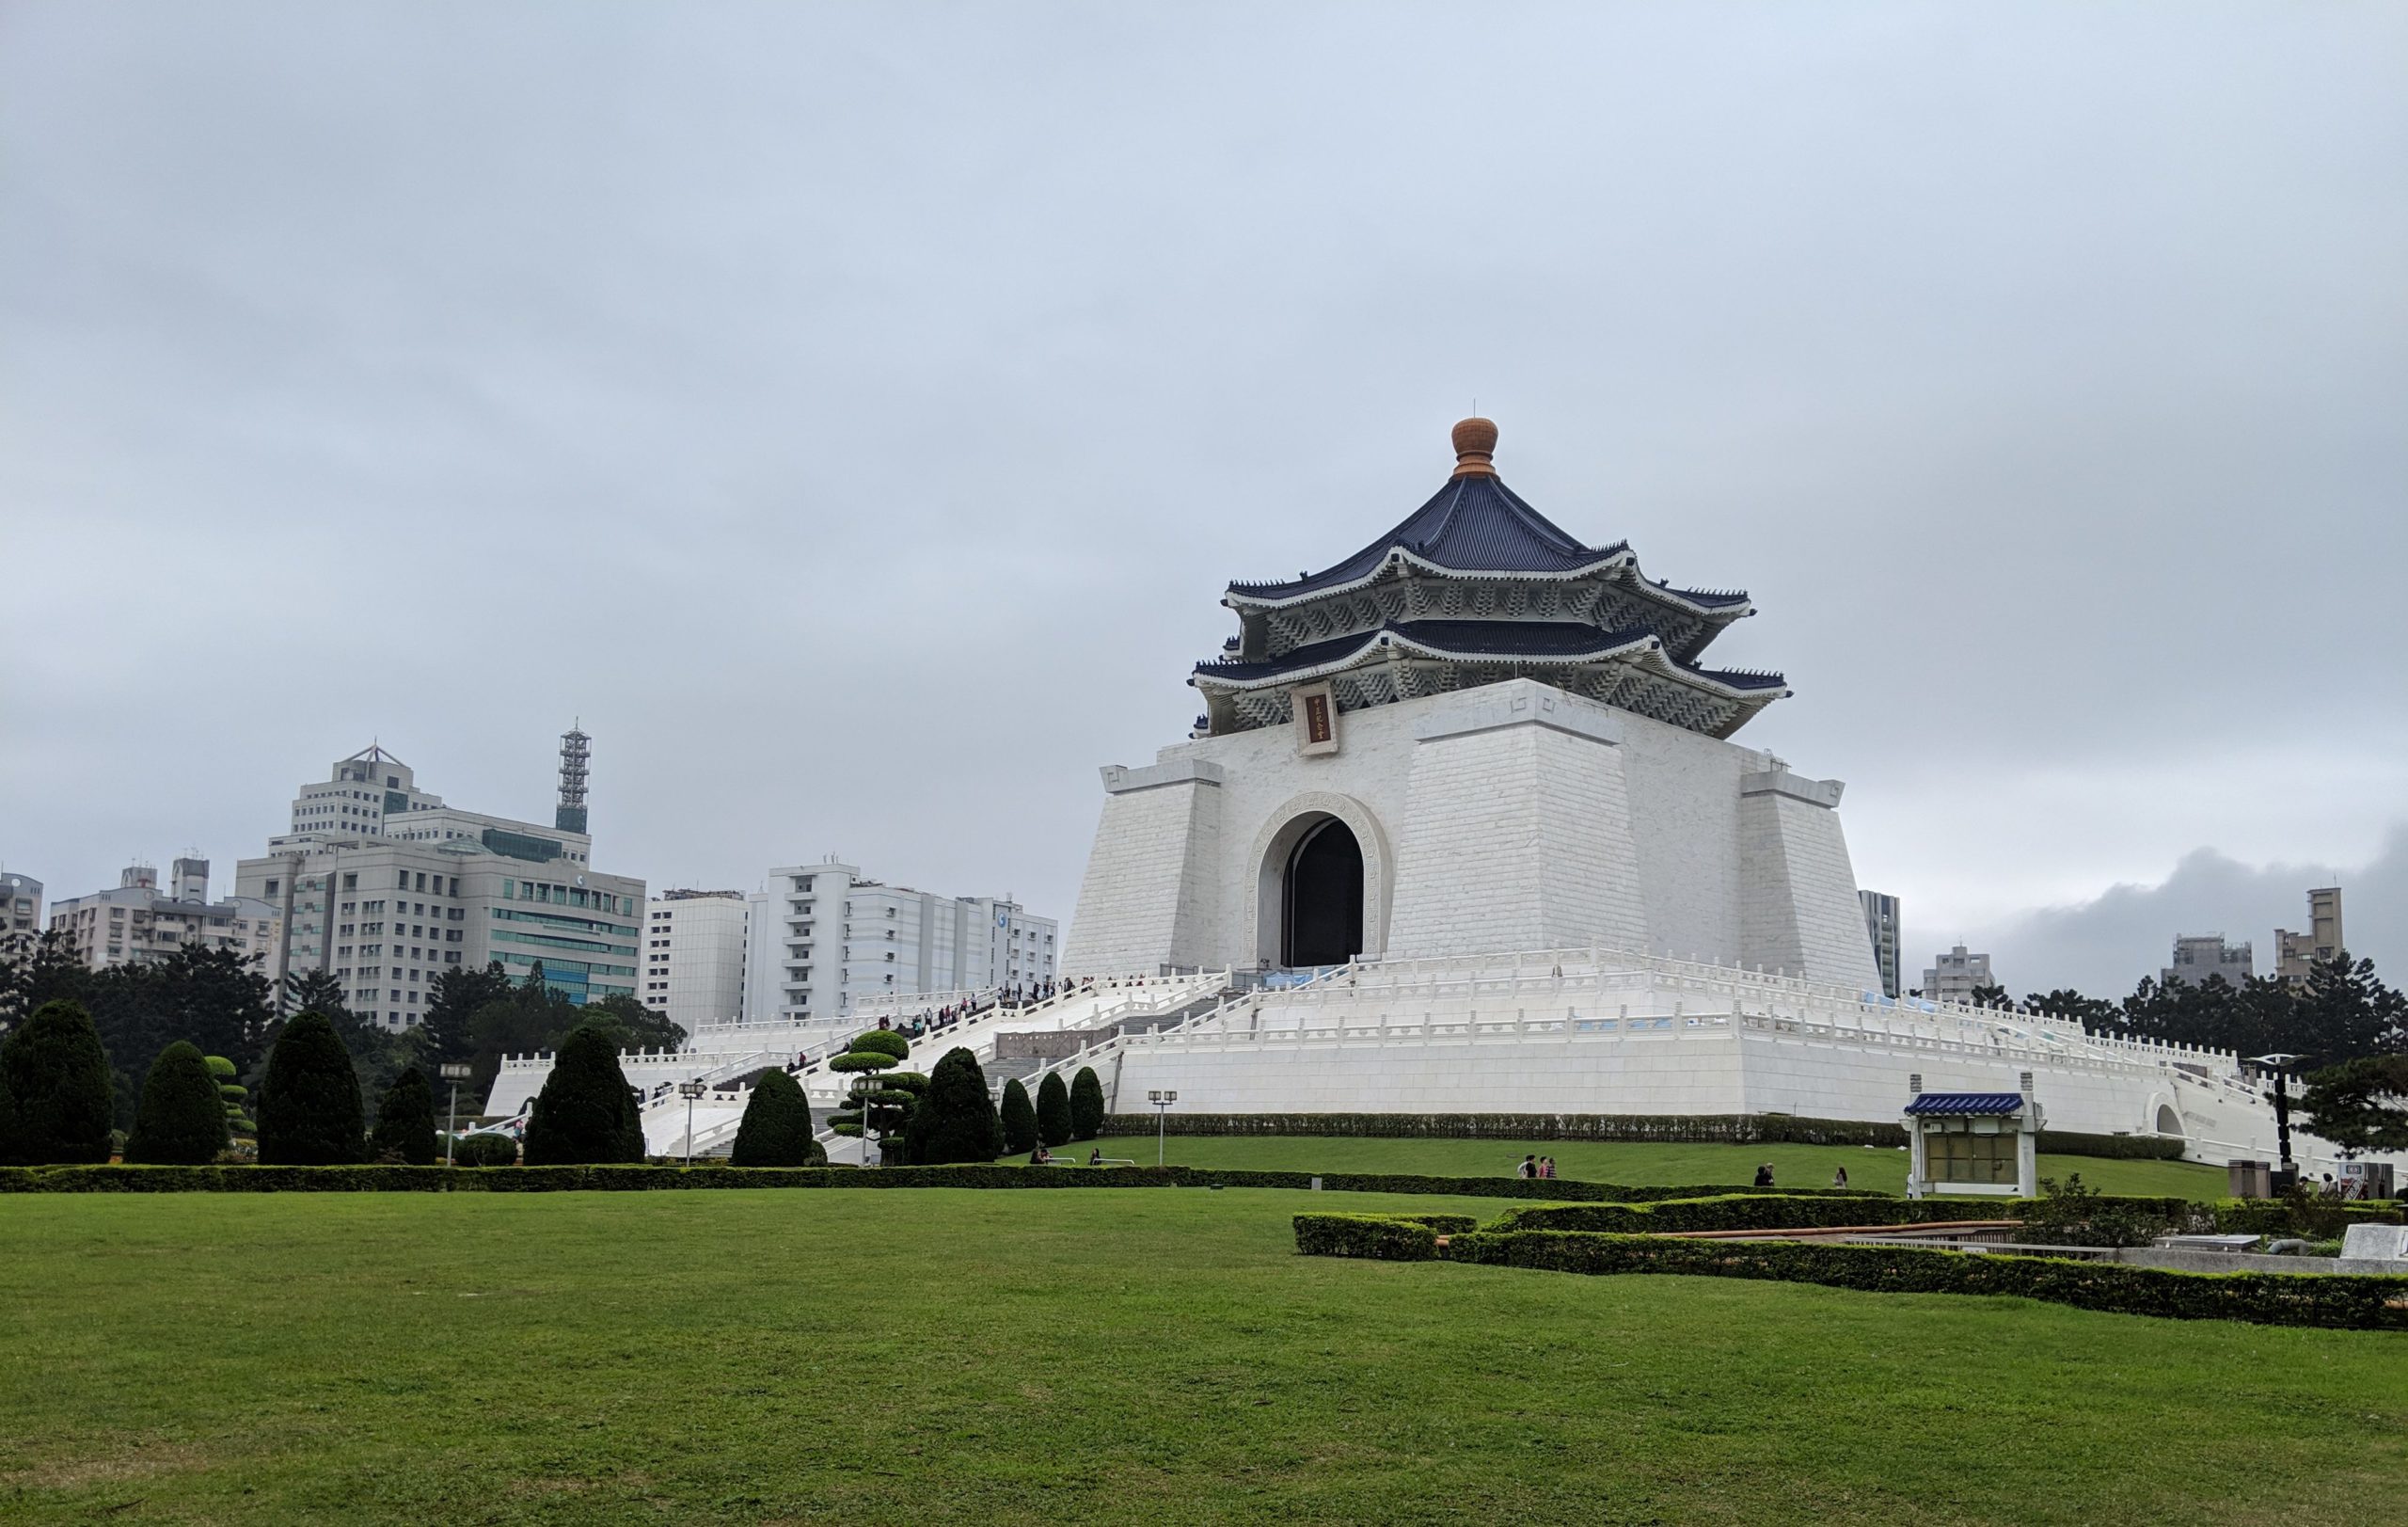 A Surprising Find in the Belly of Chiang Kai-shek Memorial Hall